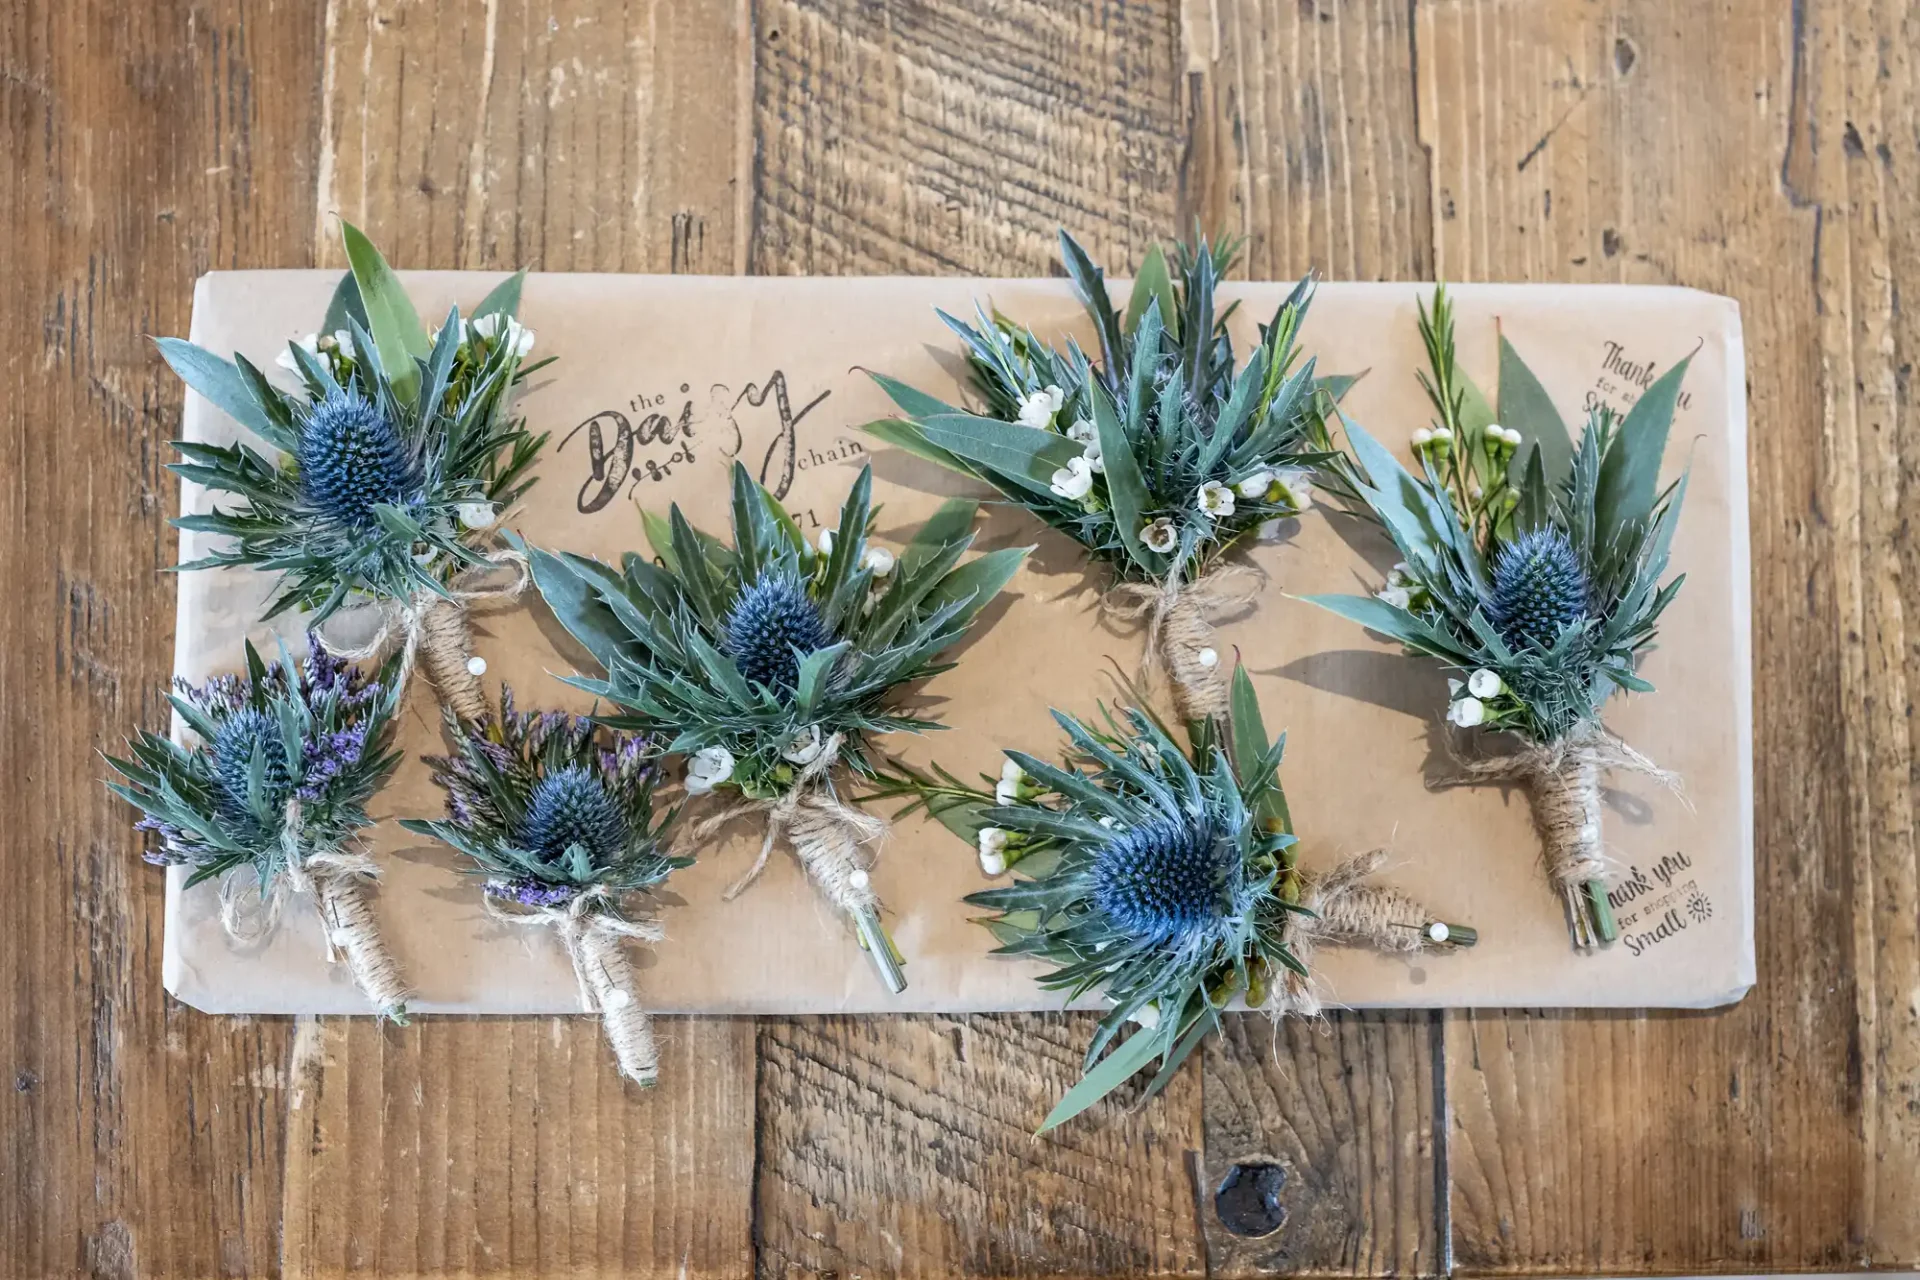 Six small floral arrangements, each featuring a blue thistle surrounded by greenery, are neatly arranged on a brown paper sheet placed on a wooden surface.